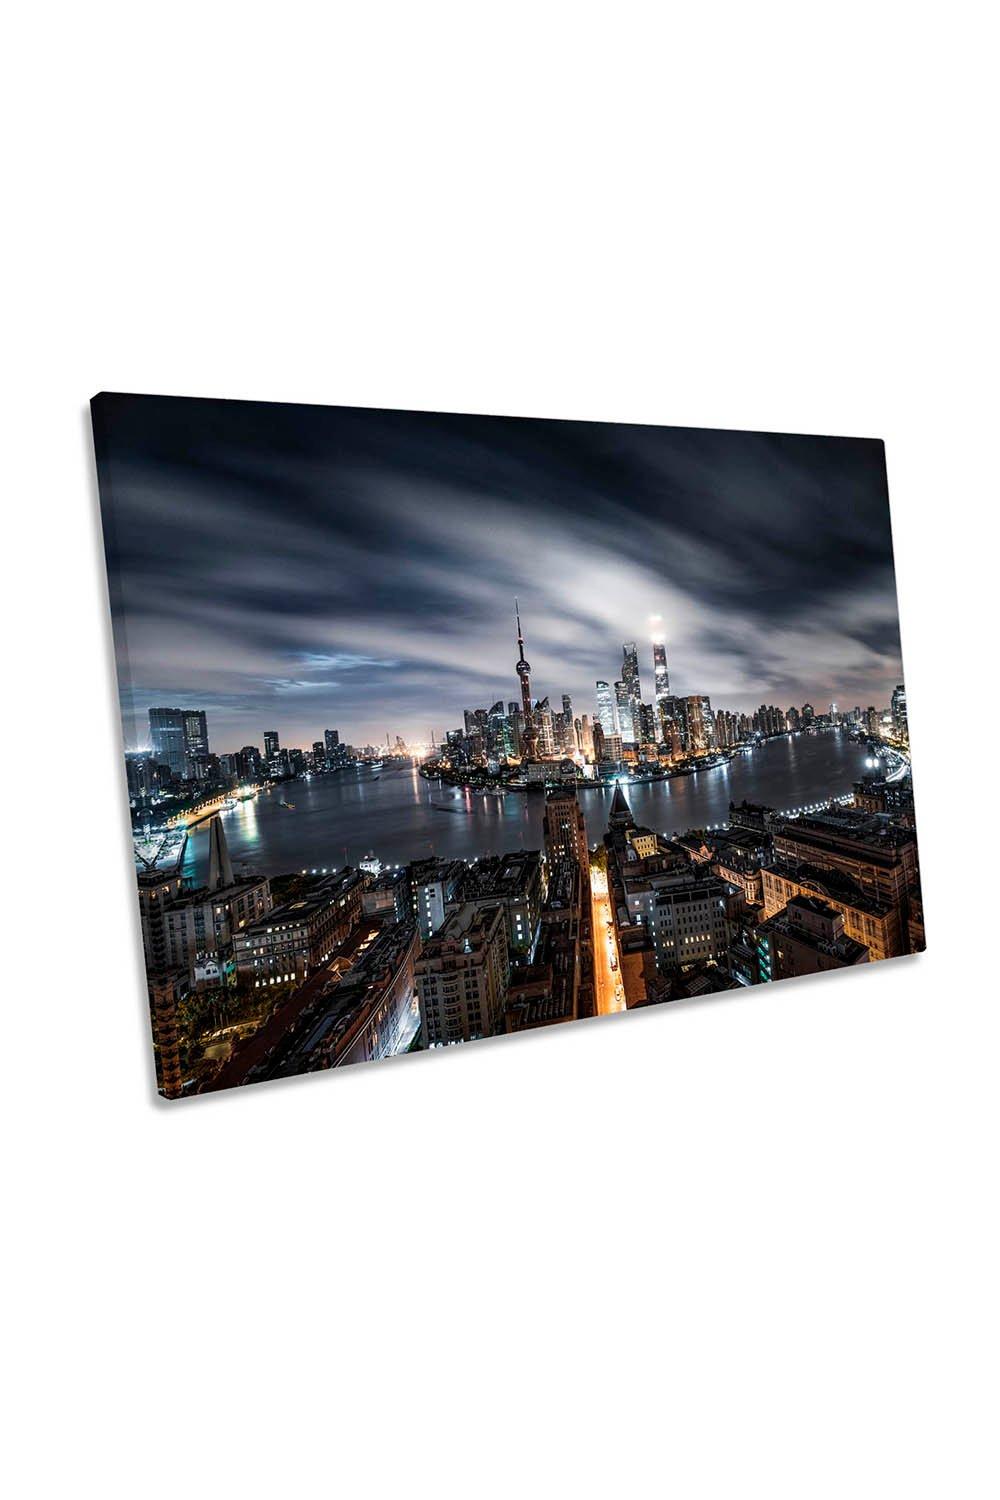 Shanghai before Sunrise City Grey Canvas Wall Art Picture Print